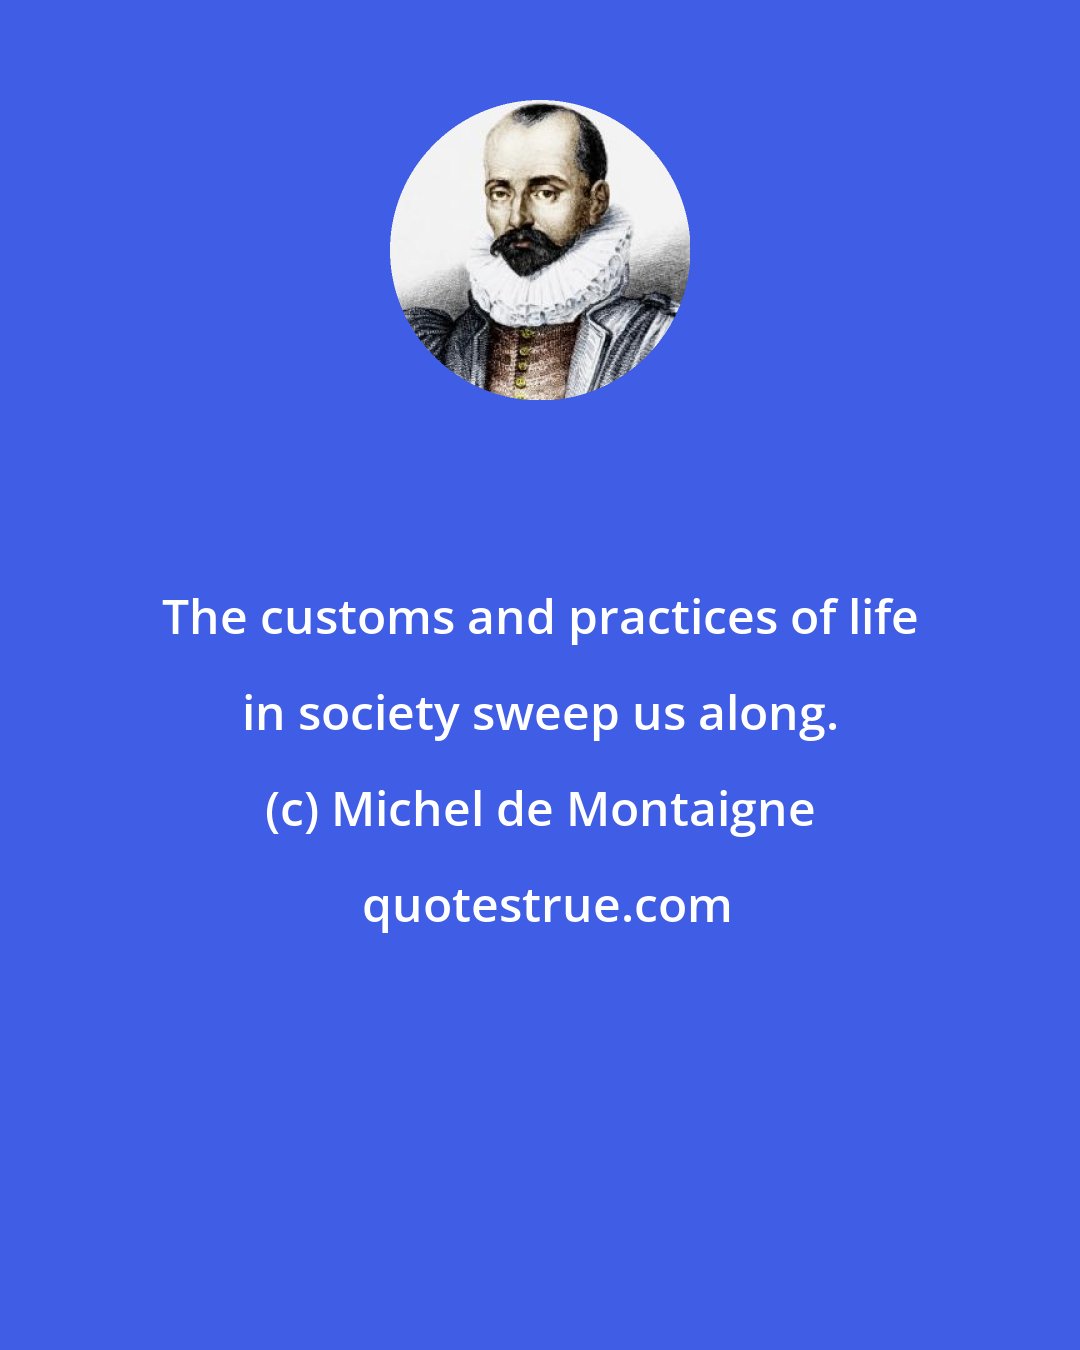 Michel de Montaigne: The customs and practices of life in society sweep us along.